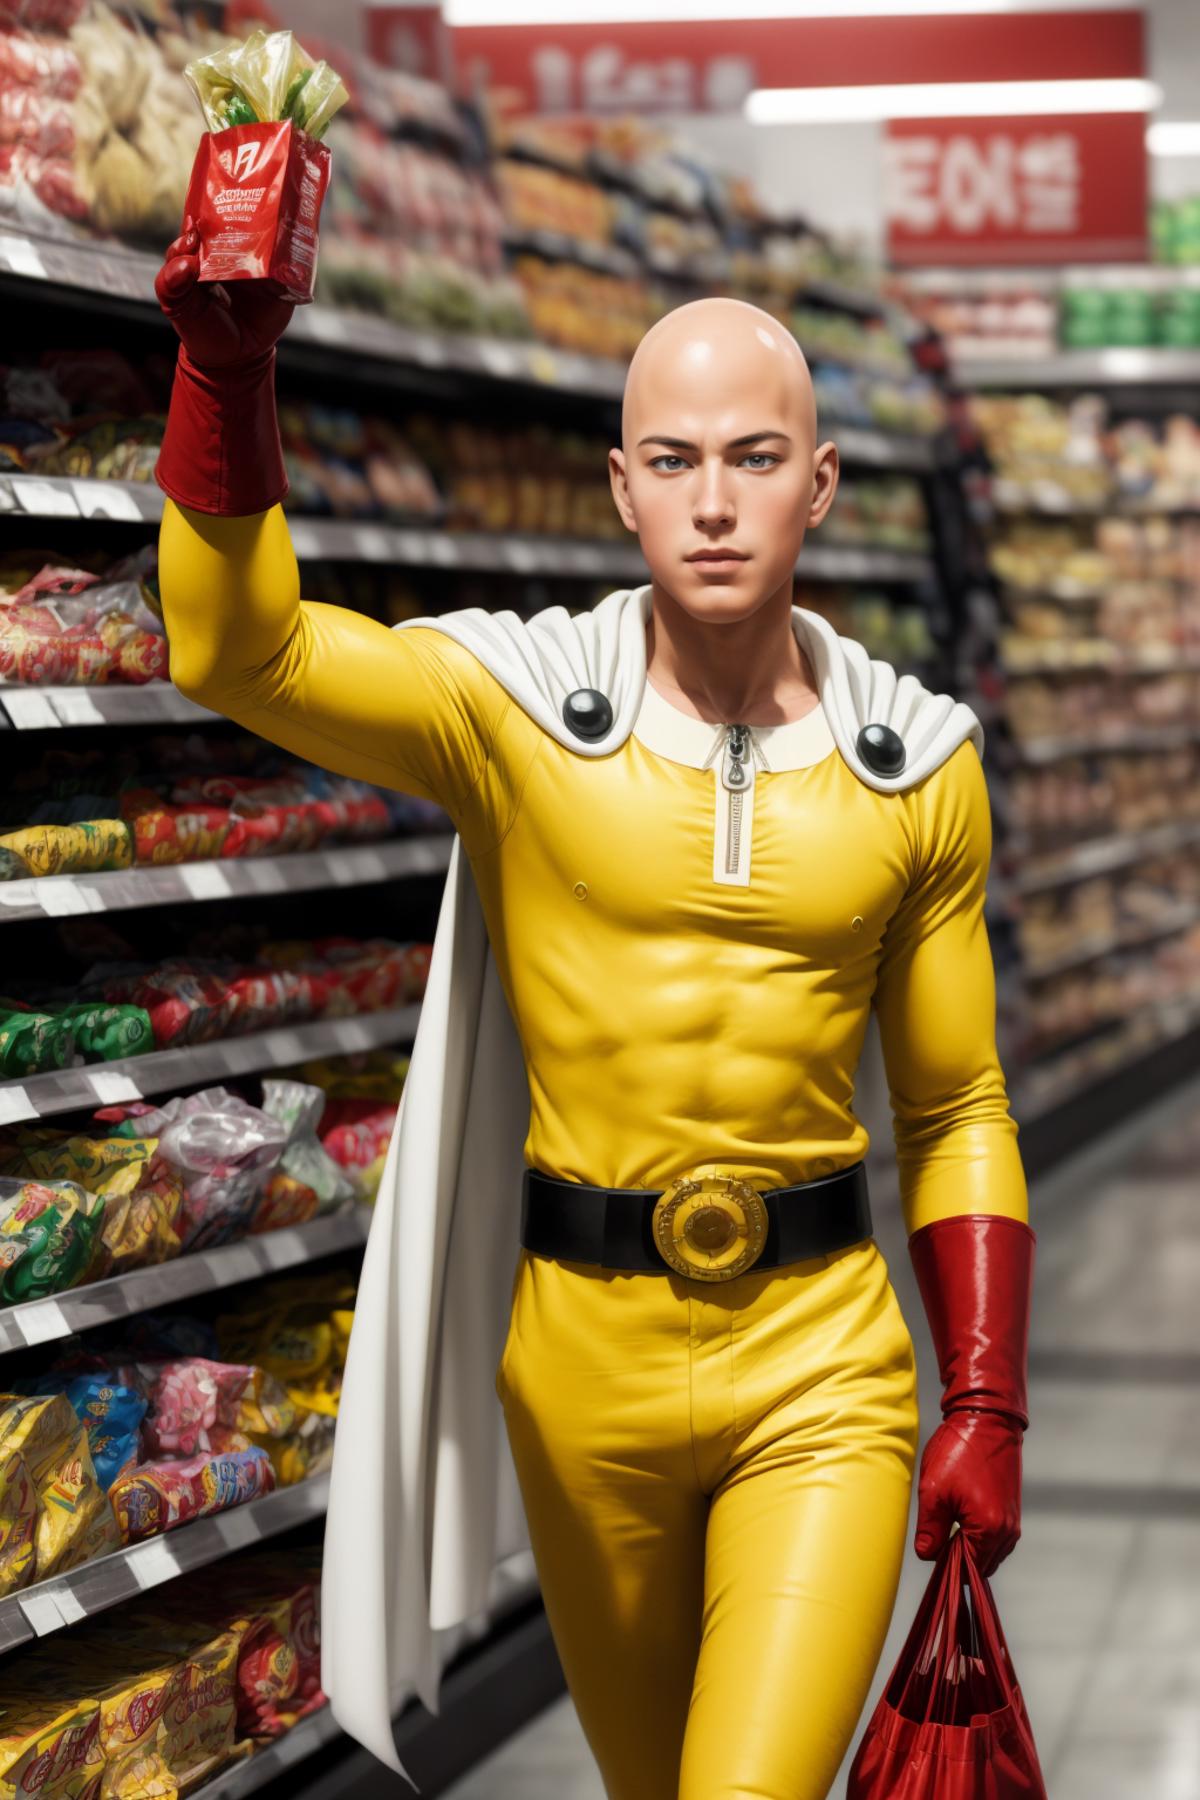 A man in a yellow and white costume is walking through a store.